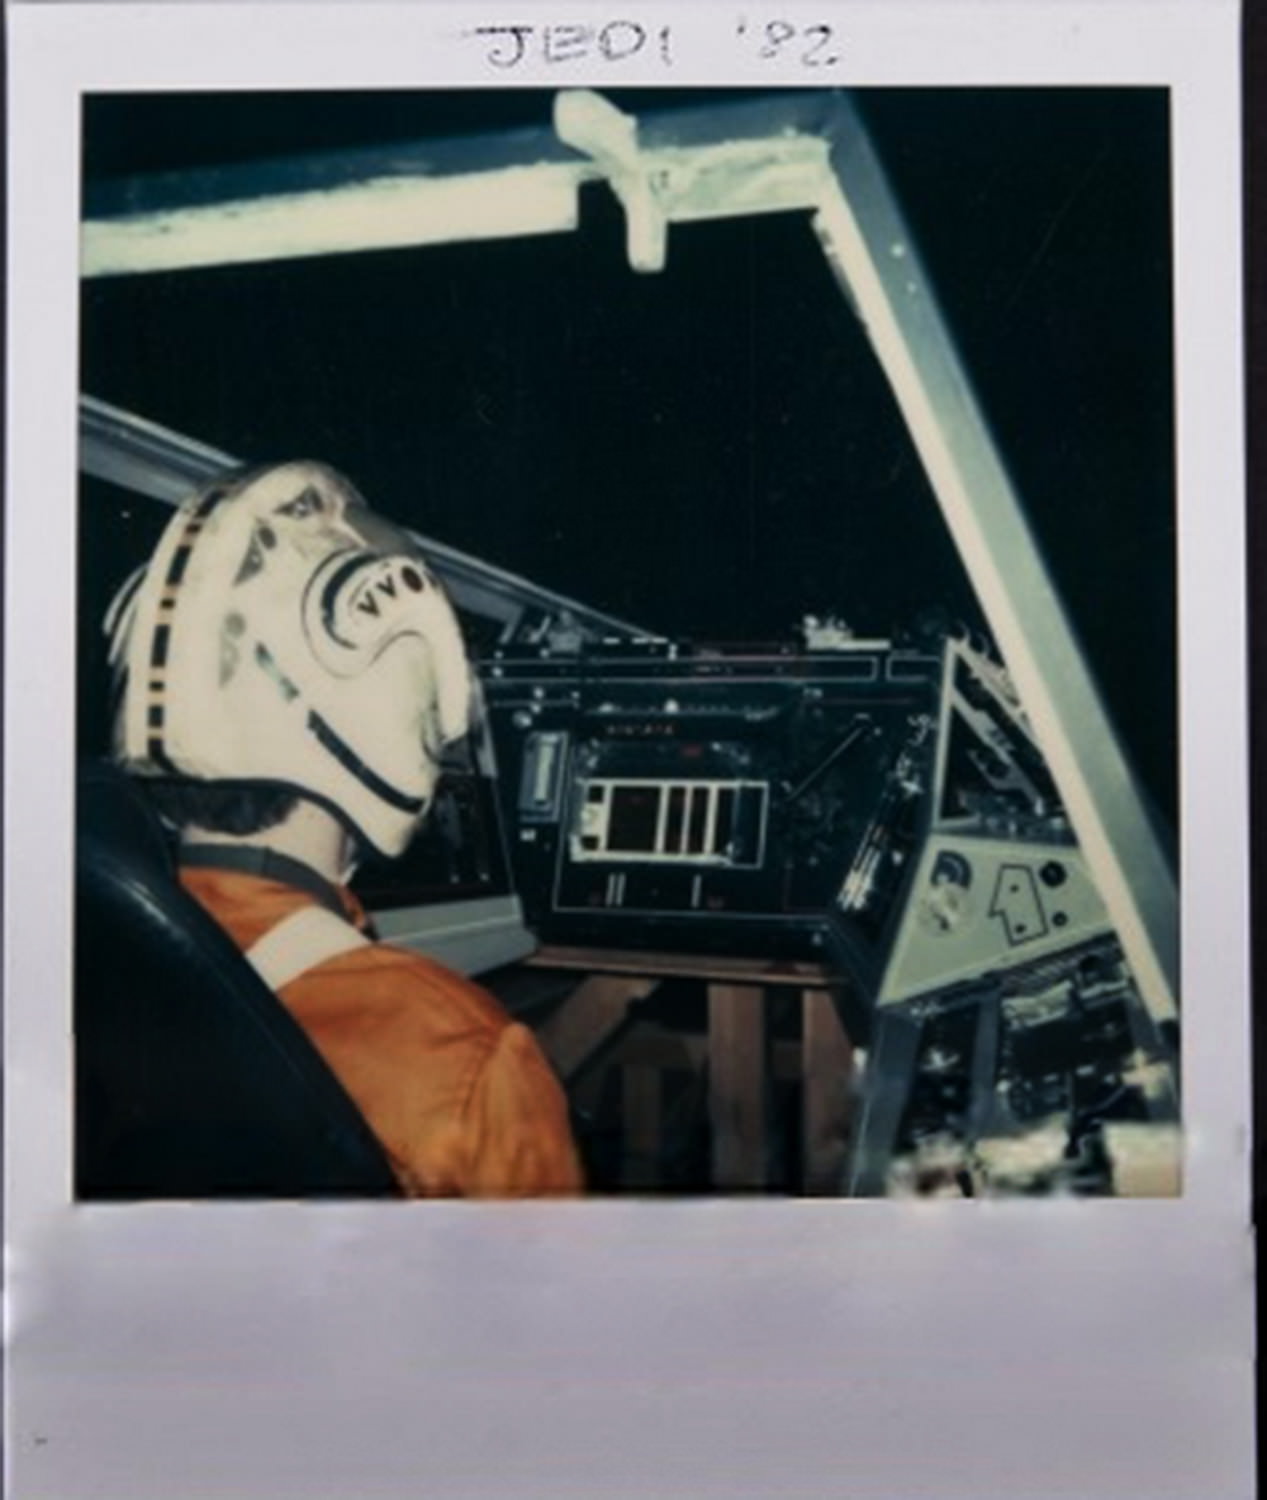 X-wing fighter continuity shot